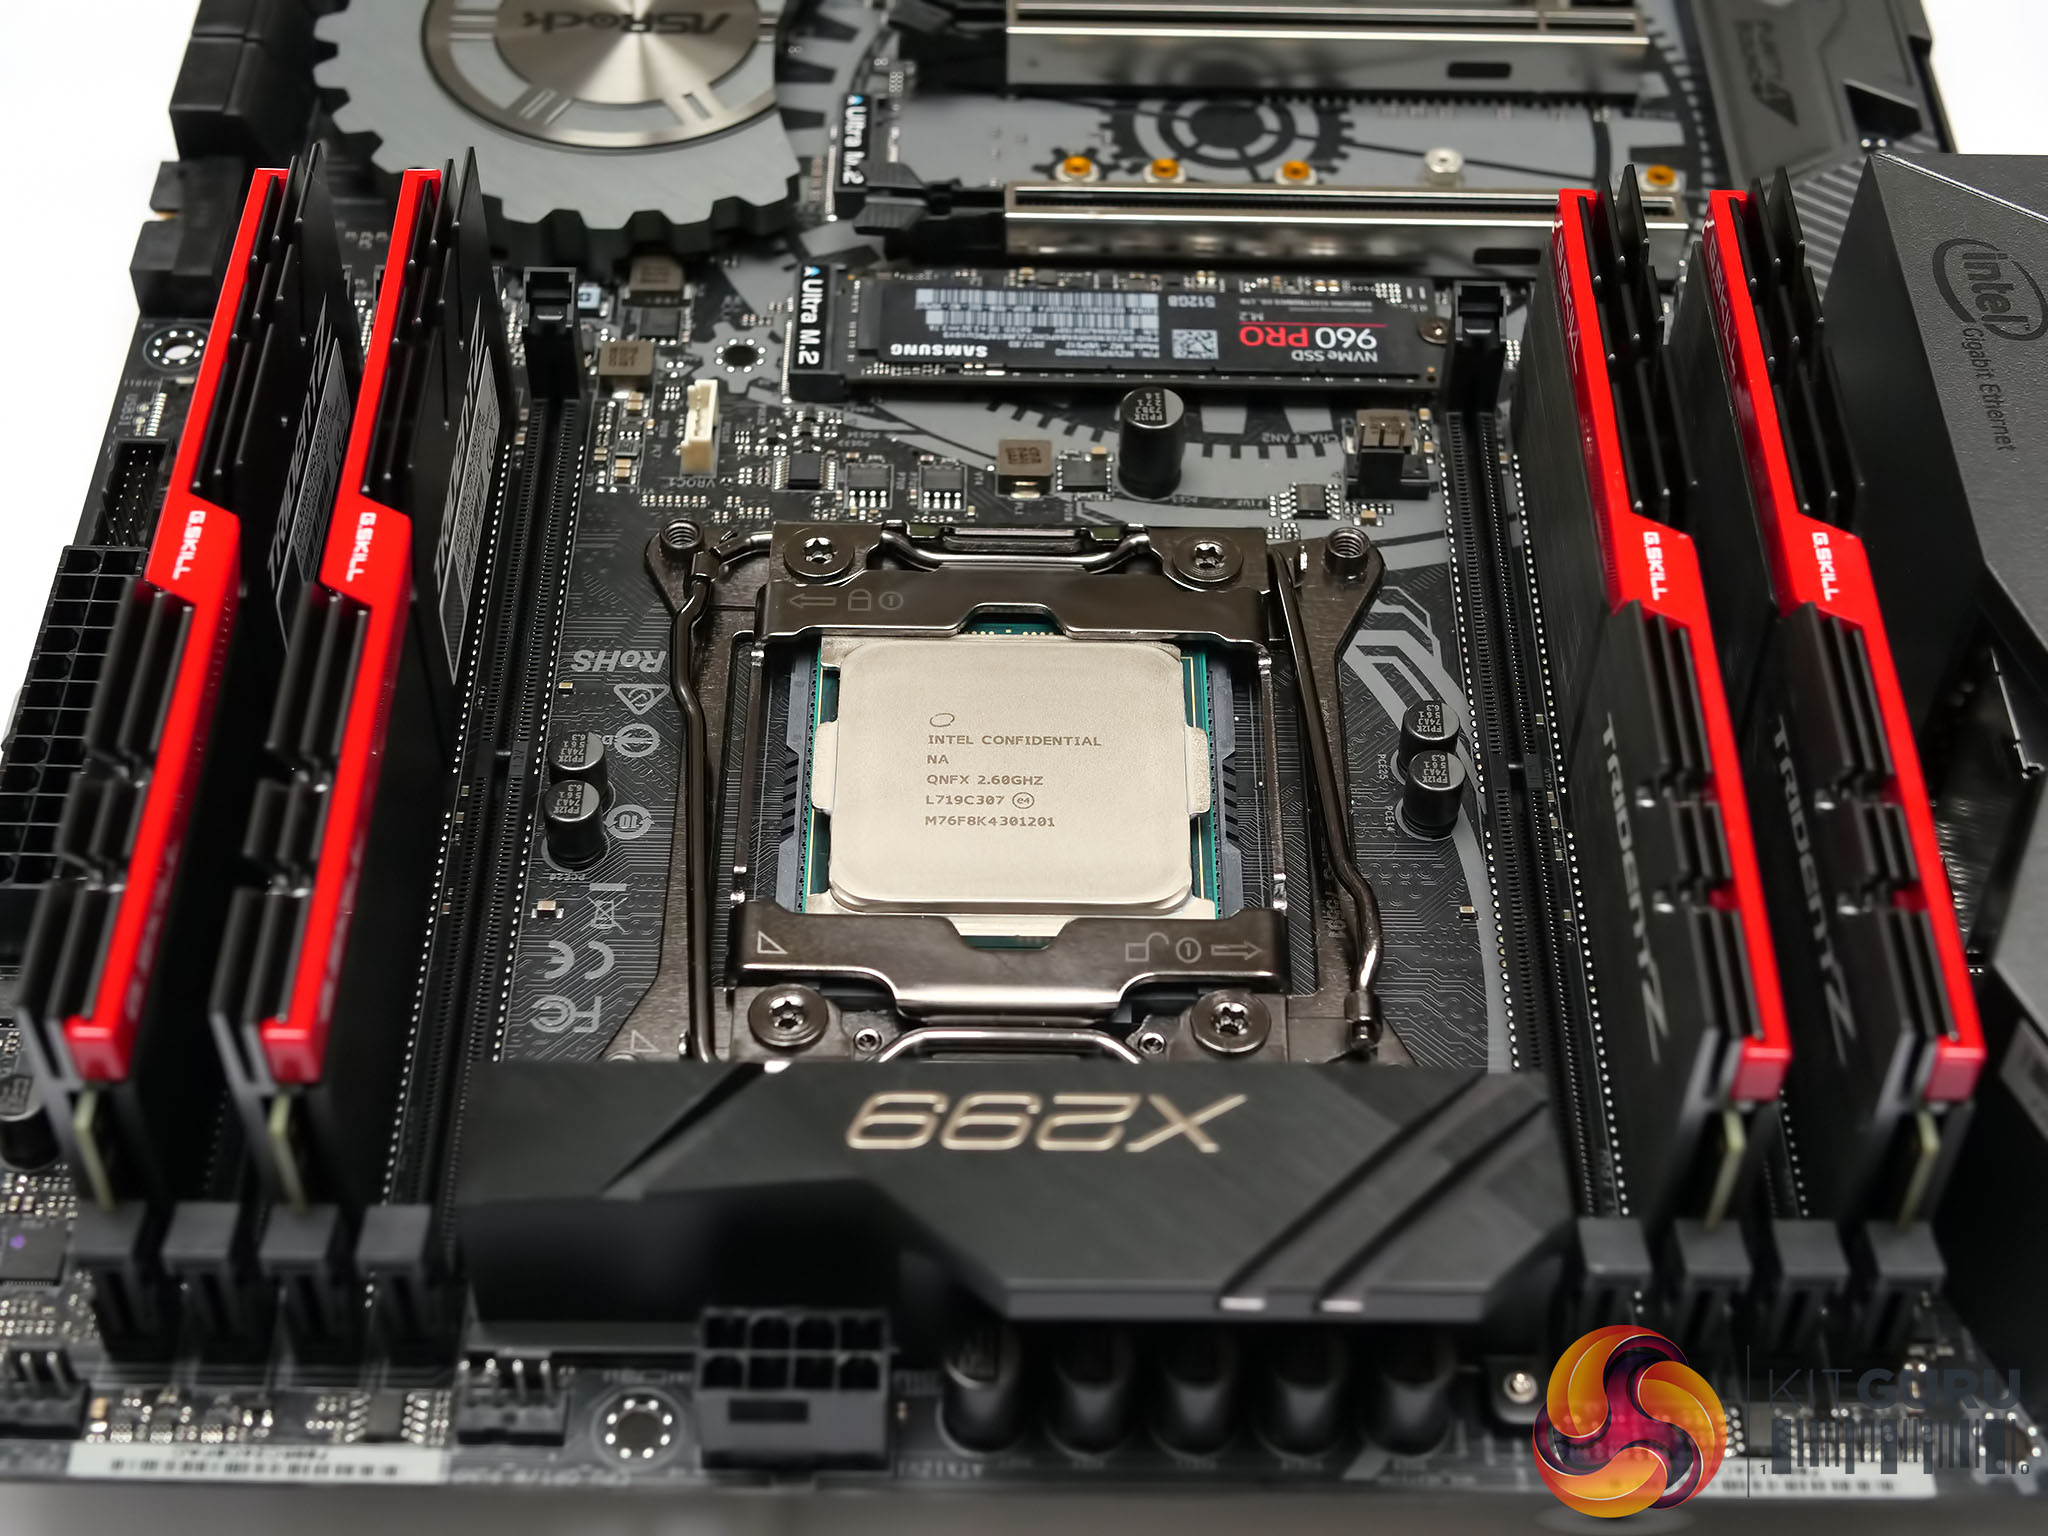 Intel Core i9-7980XE Extreme Edition – 18 cores of overclocked CPU